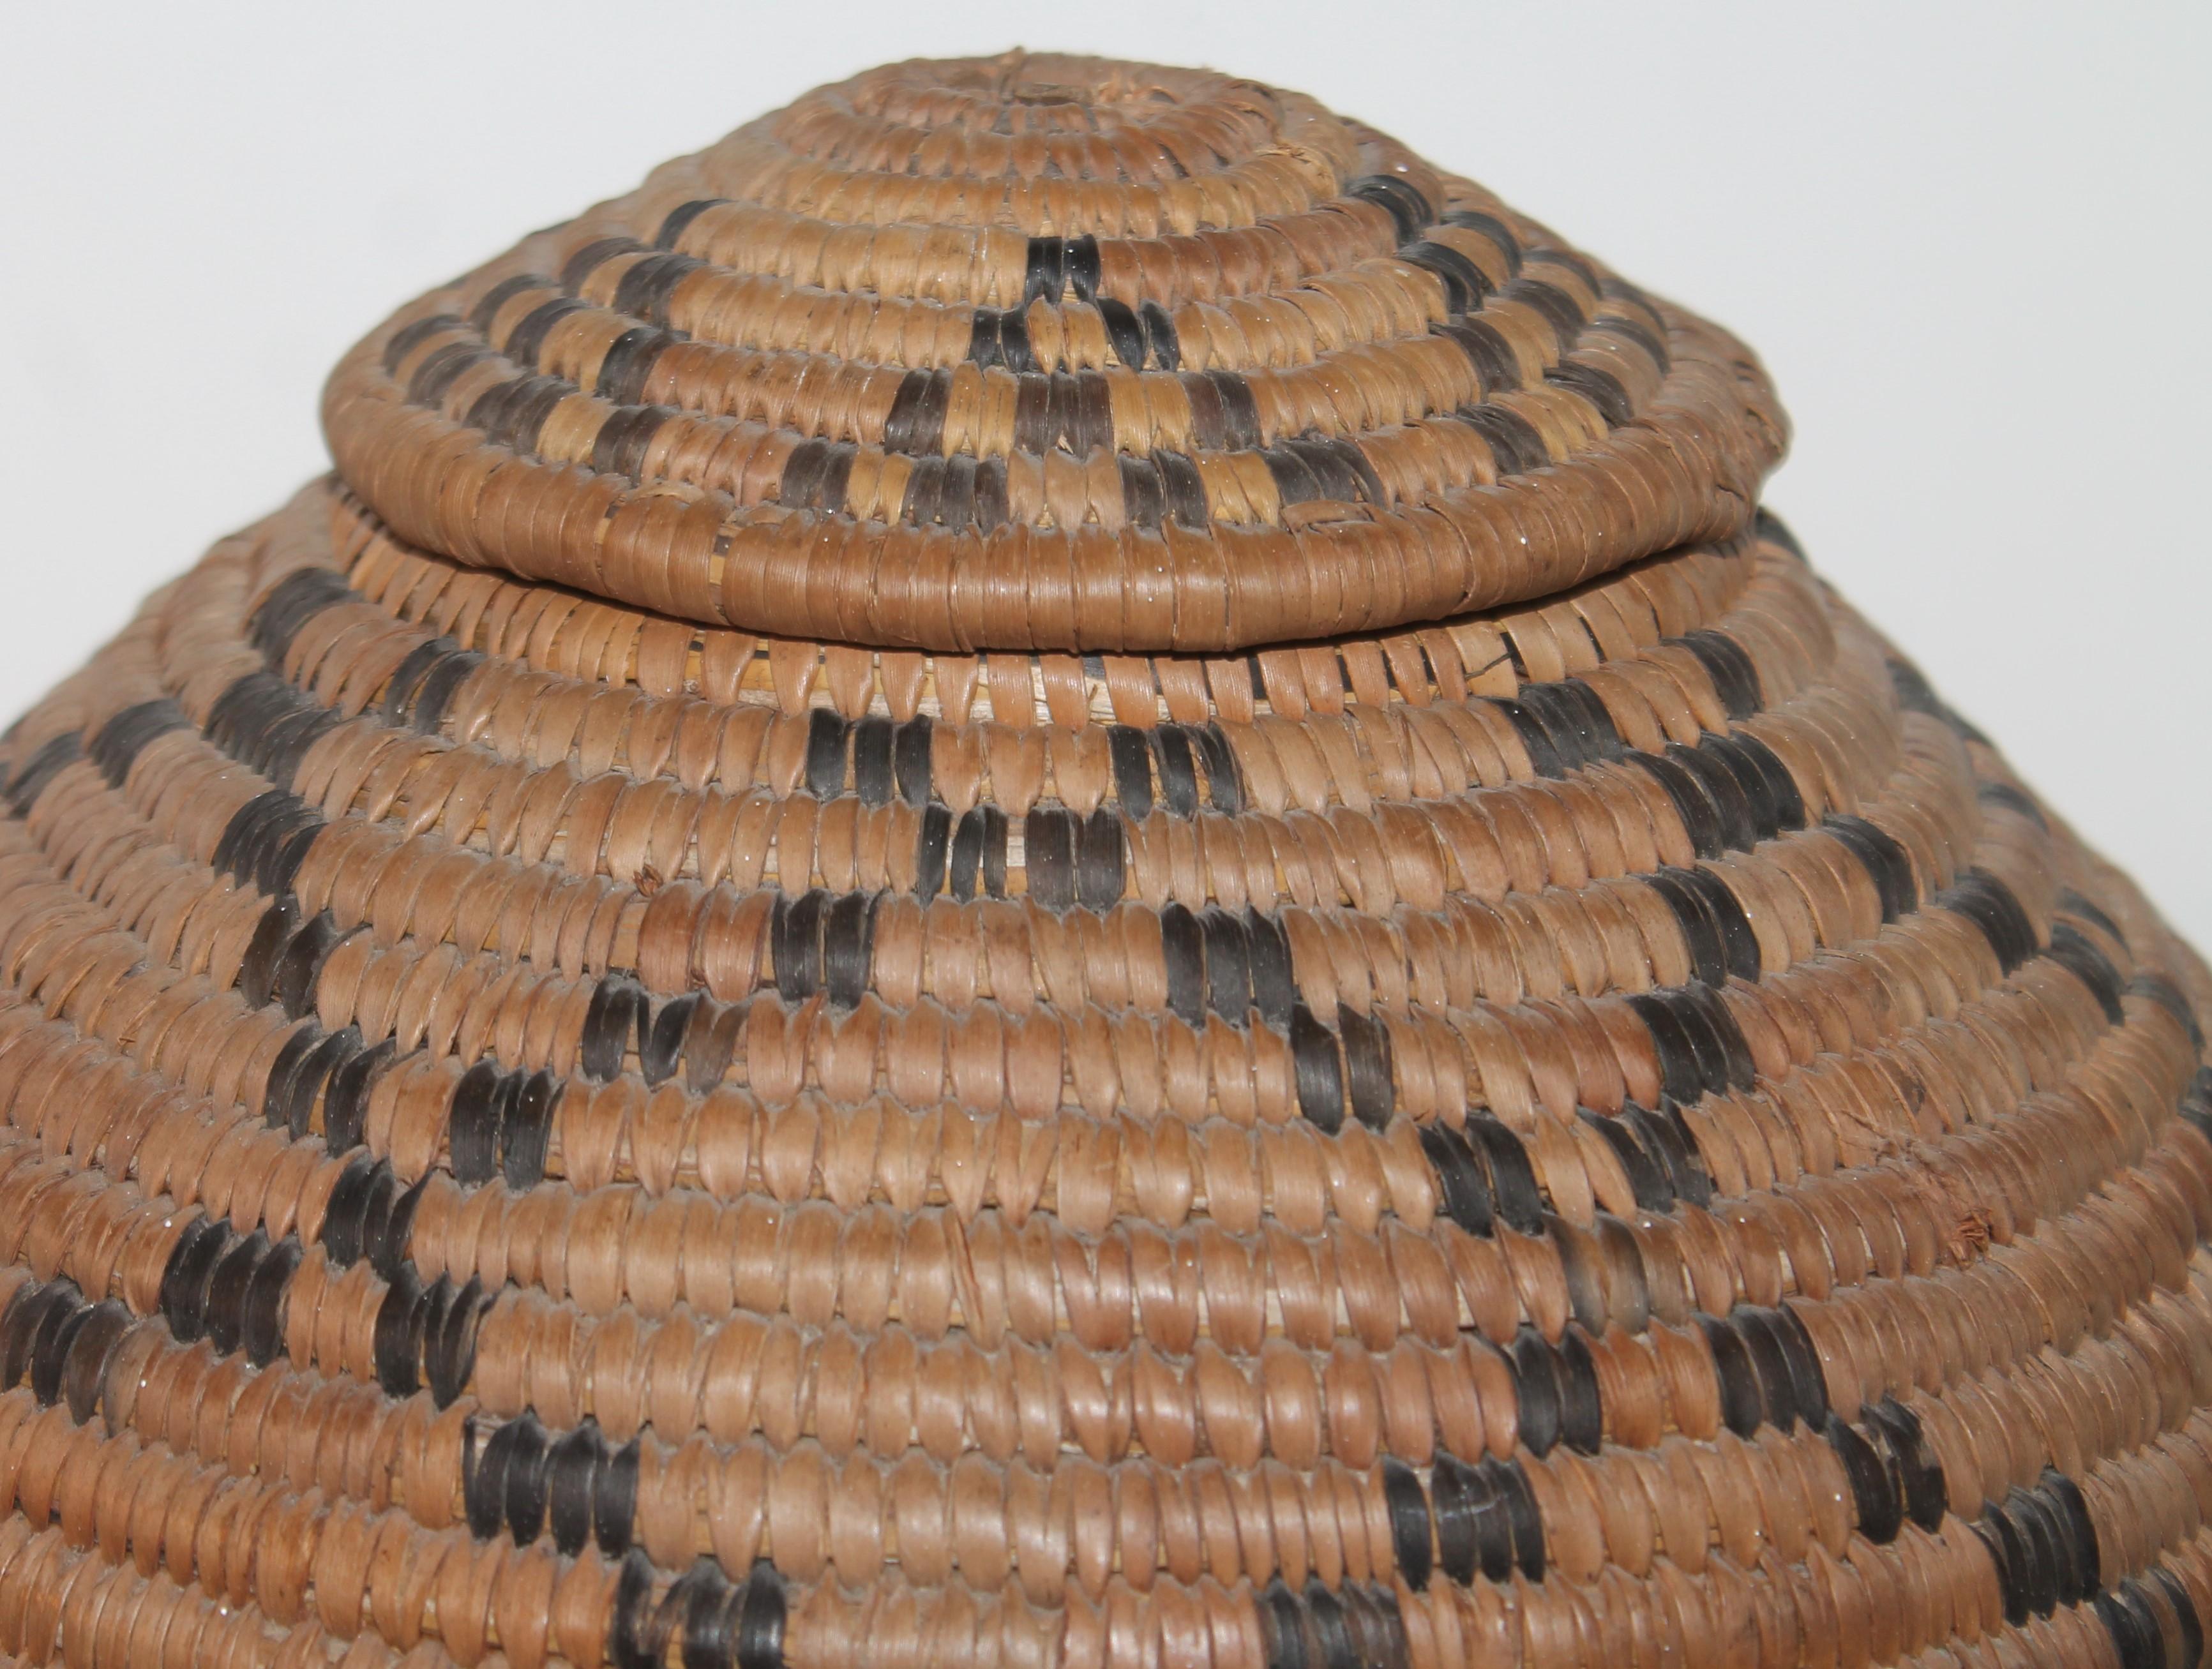 American Indian folk art Native American basket that is hand woven and coiled. It has been vegetable dyed and the basket lid is removable. The interior reinforcement of the lid is made from shaven pine to strengthen the hold of the lid to the basket.